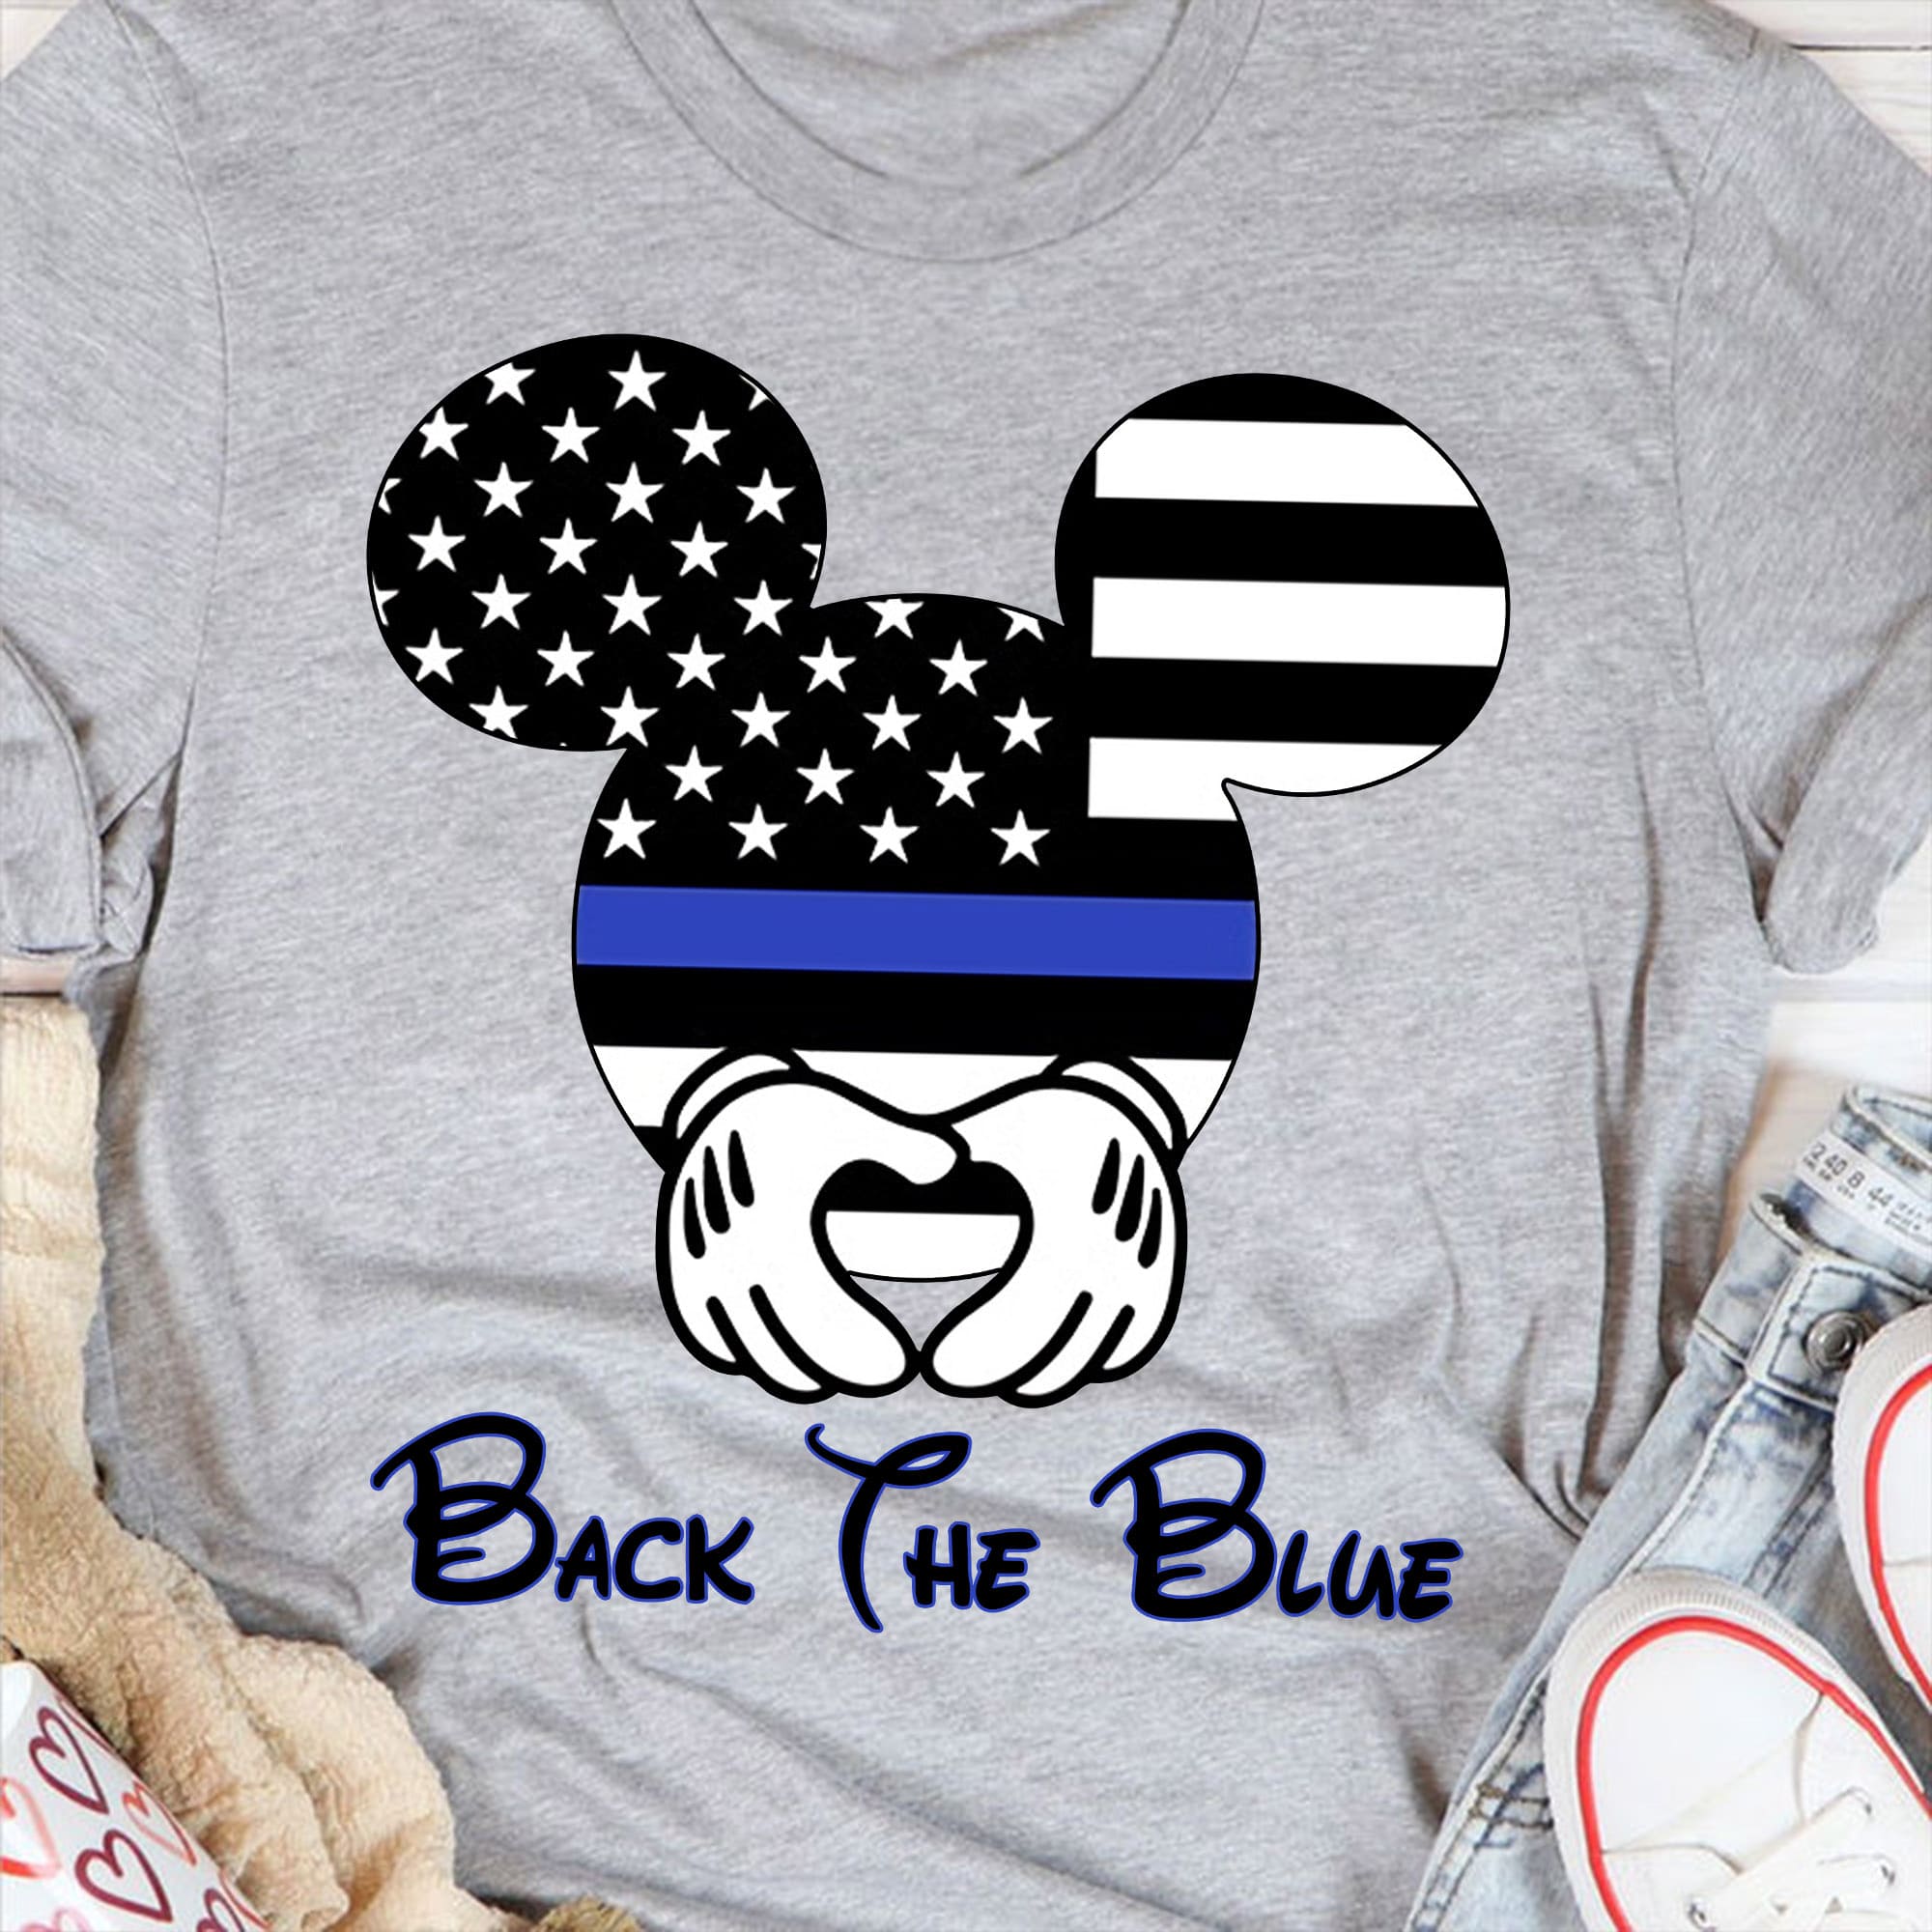 Back the blue - Protect our police, America back the blue